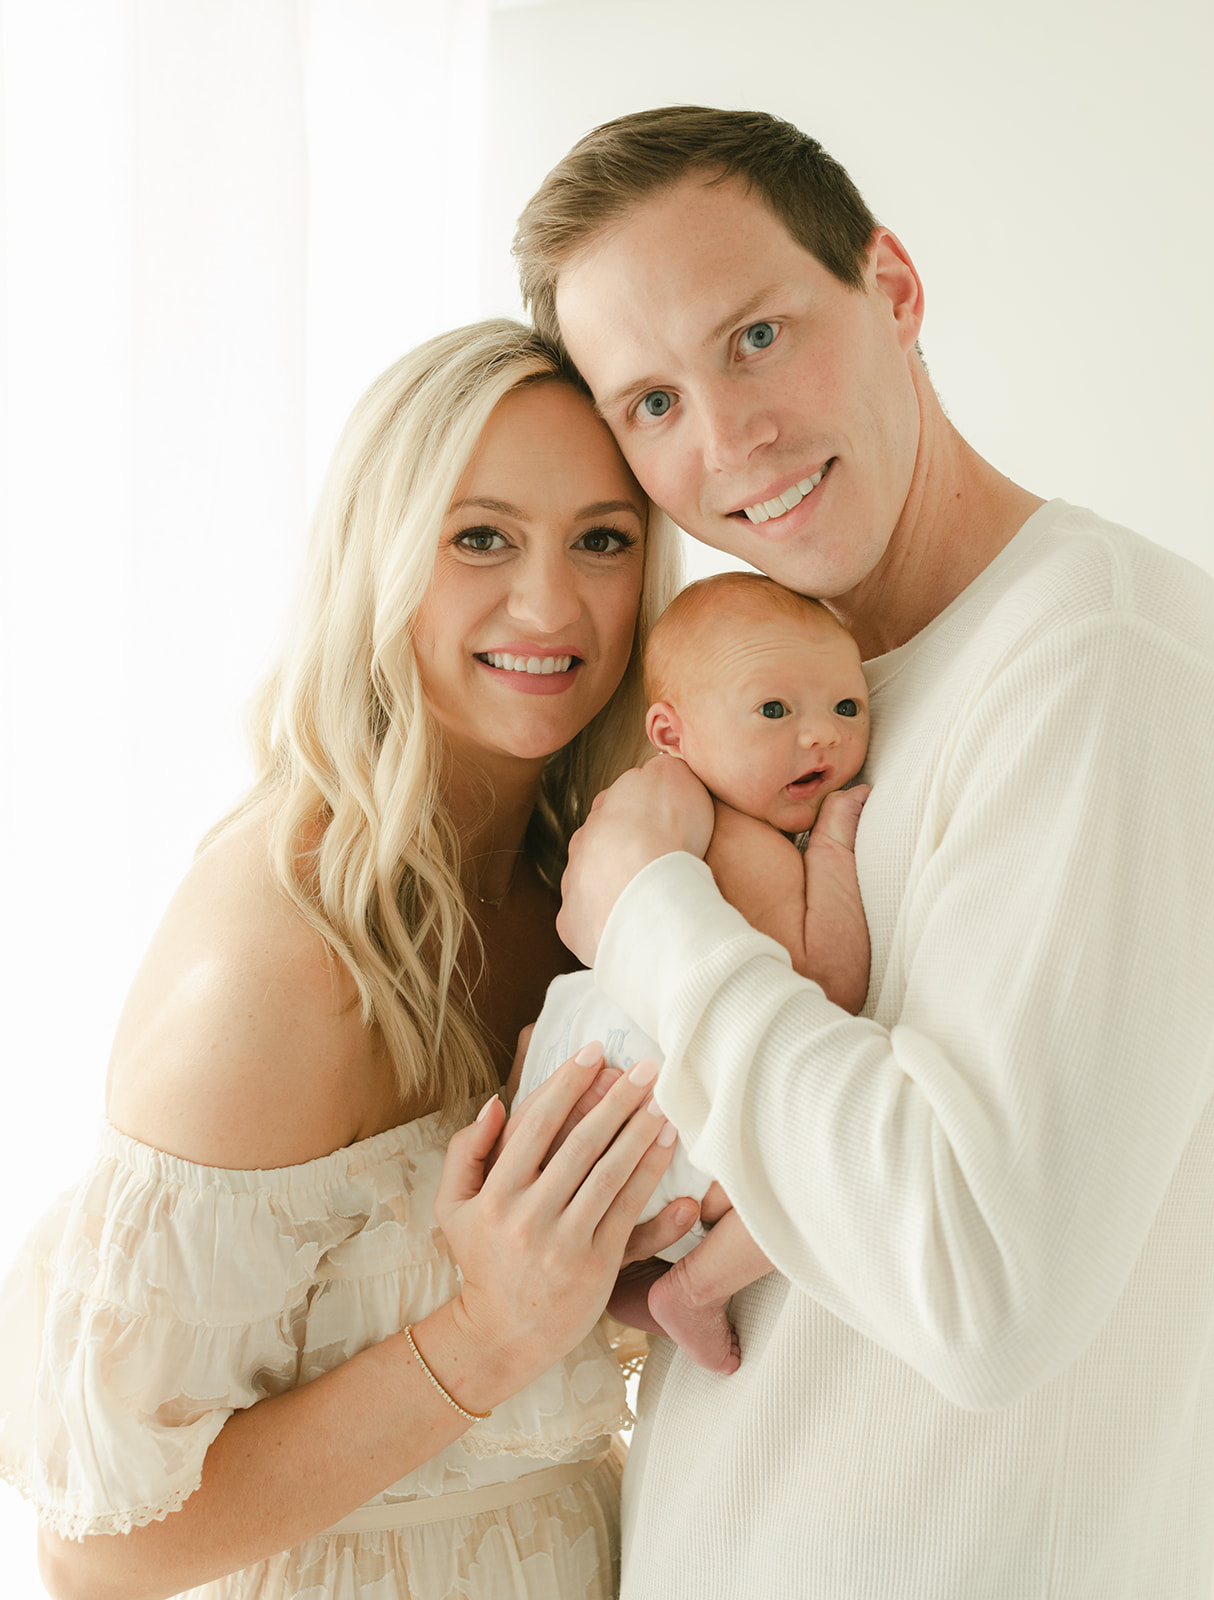 newborn baby session in nashville tennessee. photo of dad, mom and newborn baby boy